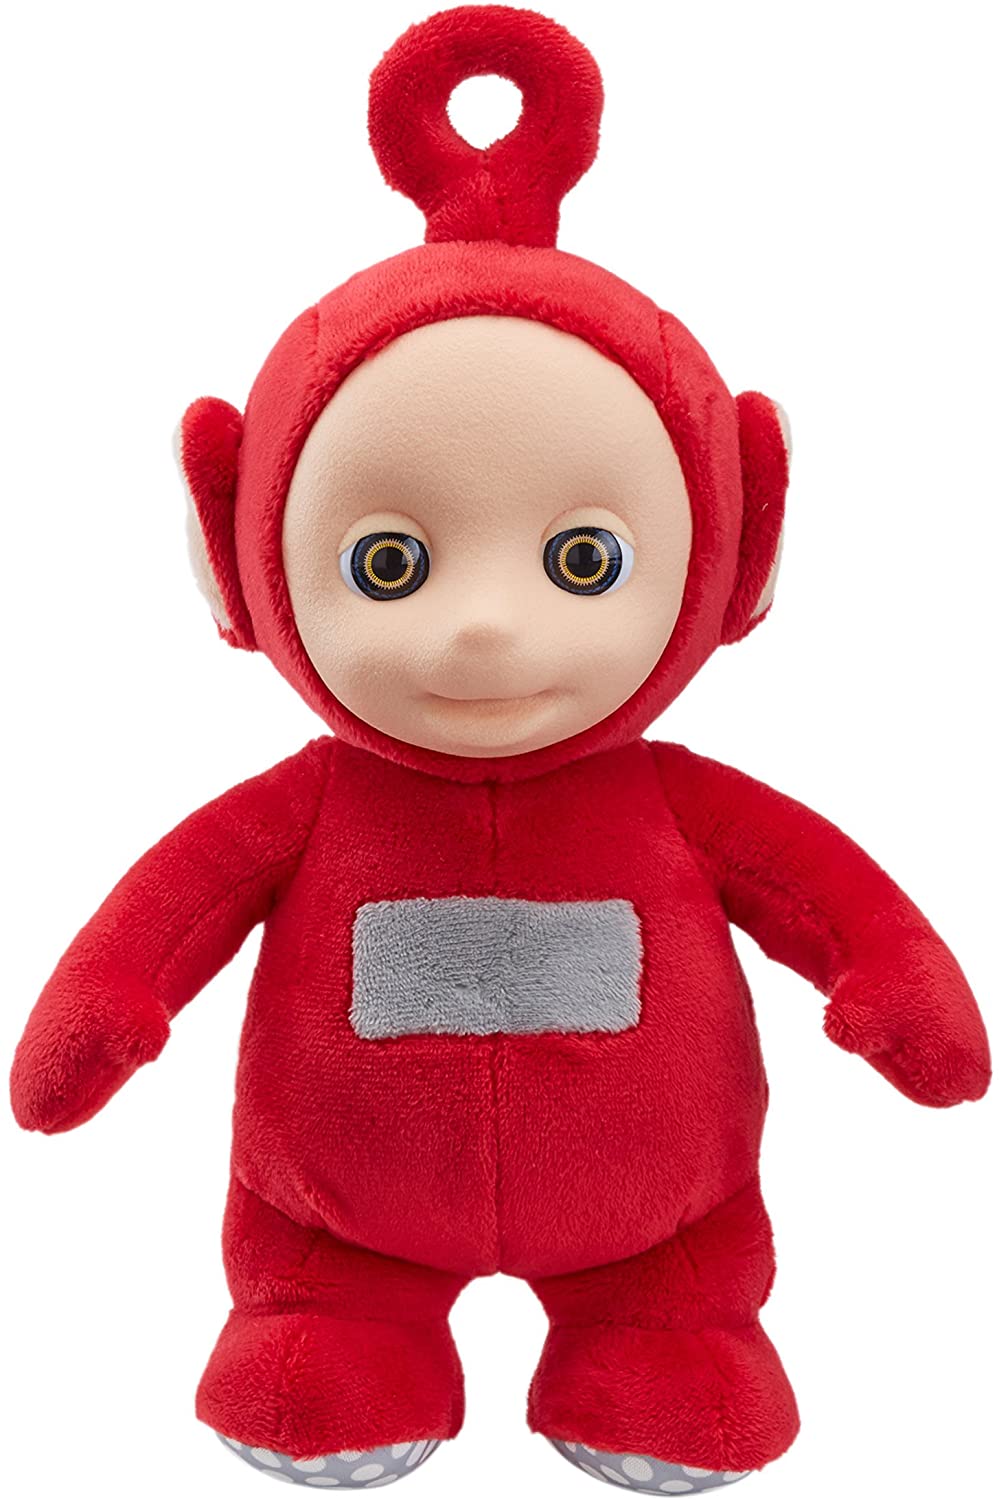 Teletubbies 06107 Cbeebies Talking Po Soft Toy, Red